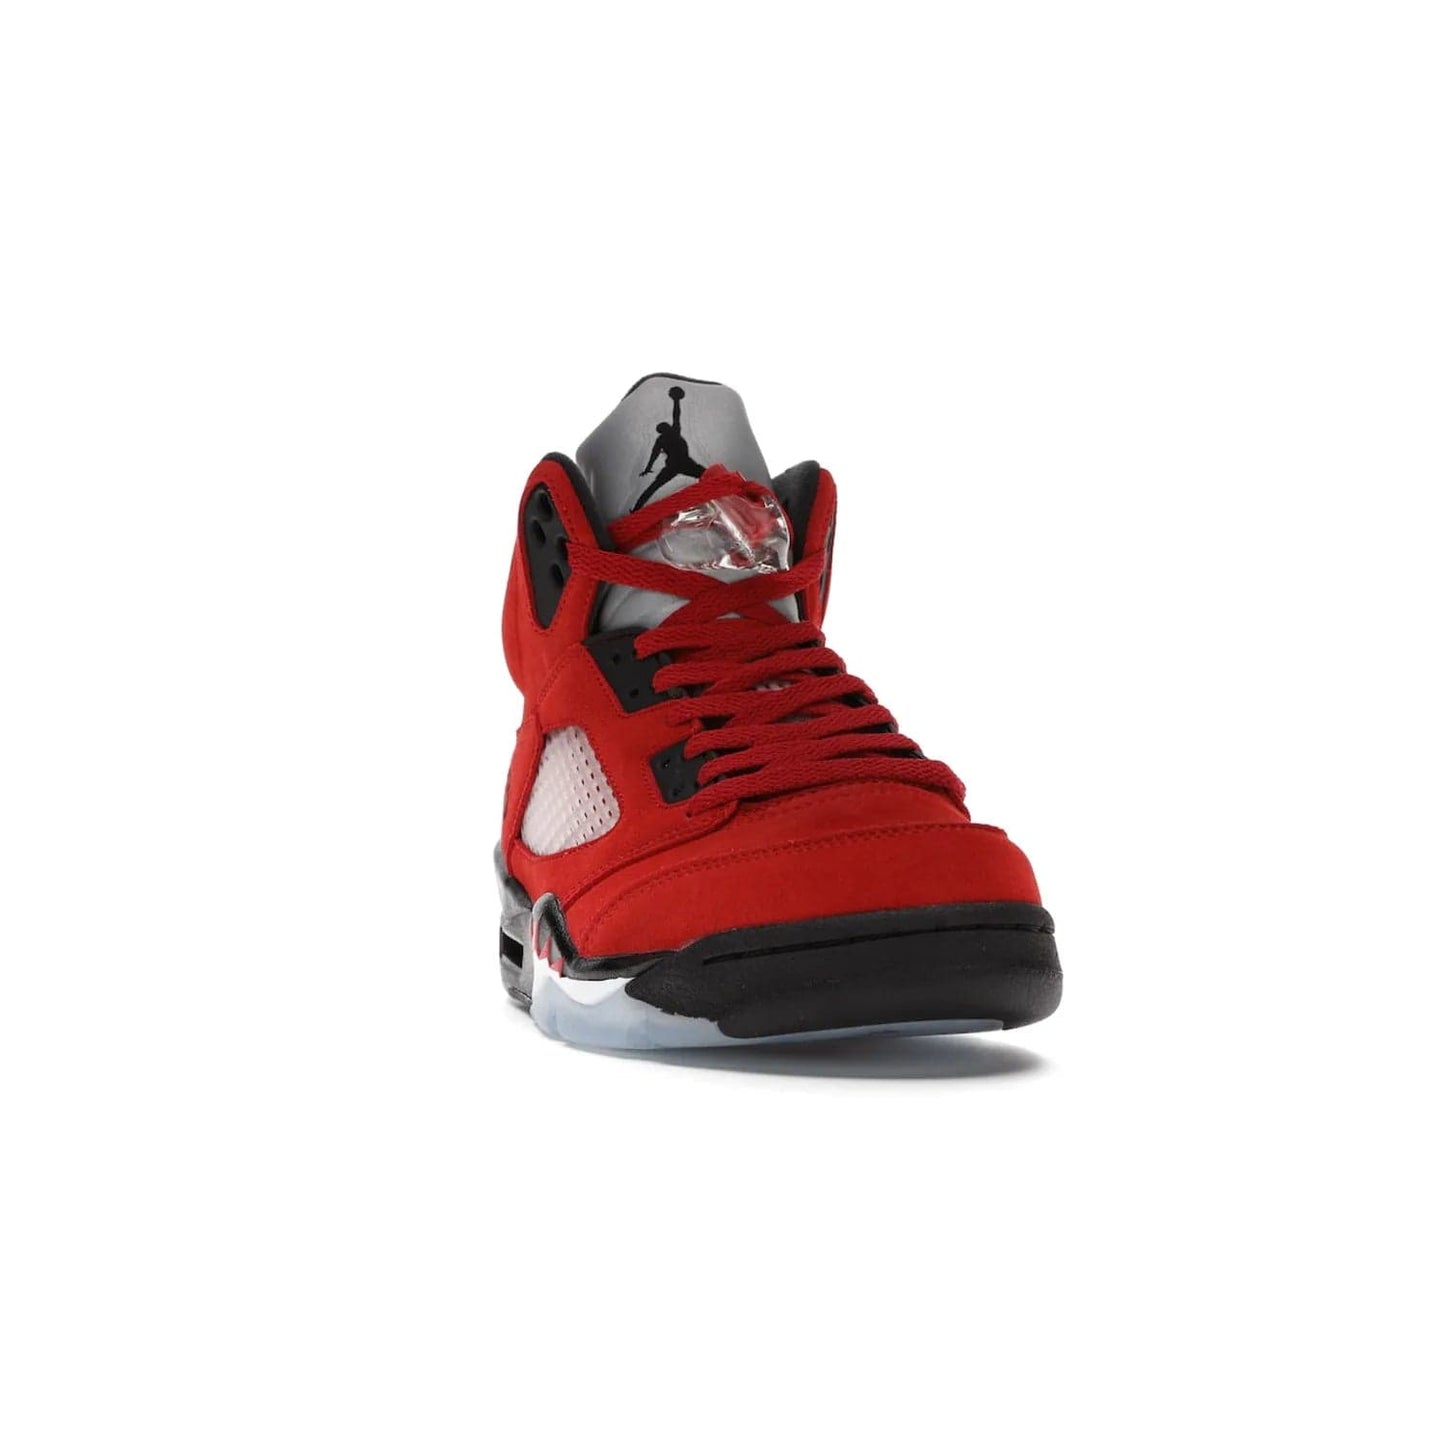 Jordan 5 Retro Raging Bull Red (2021) - Image 8 - Only at www.BallersClubKickz.com - Get ready for the 2021 stand-alone release of the Air Jordan 5 Raging Bulls! This all-suede upper combines luxe details like a Jumpman logo, red & black "23" embroidery and shark tooth detailing, atop a black midsole. Don't miss out - release date in April 2021 for $190.